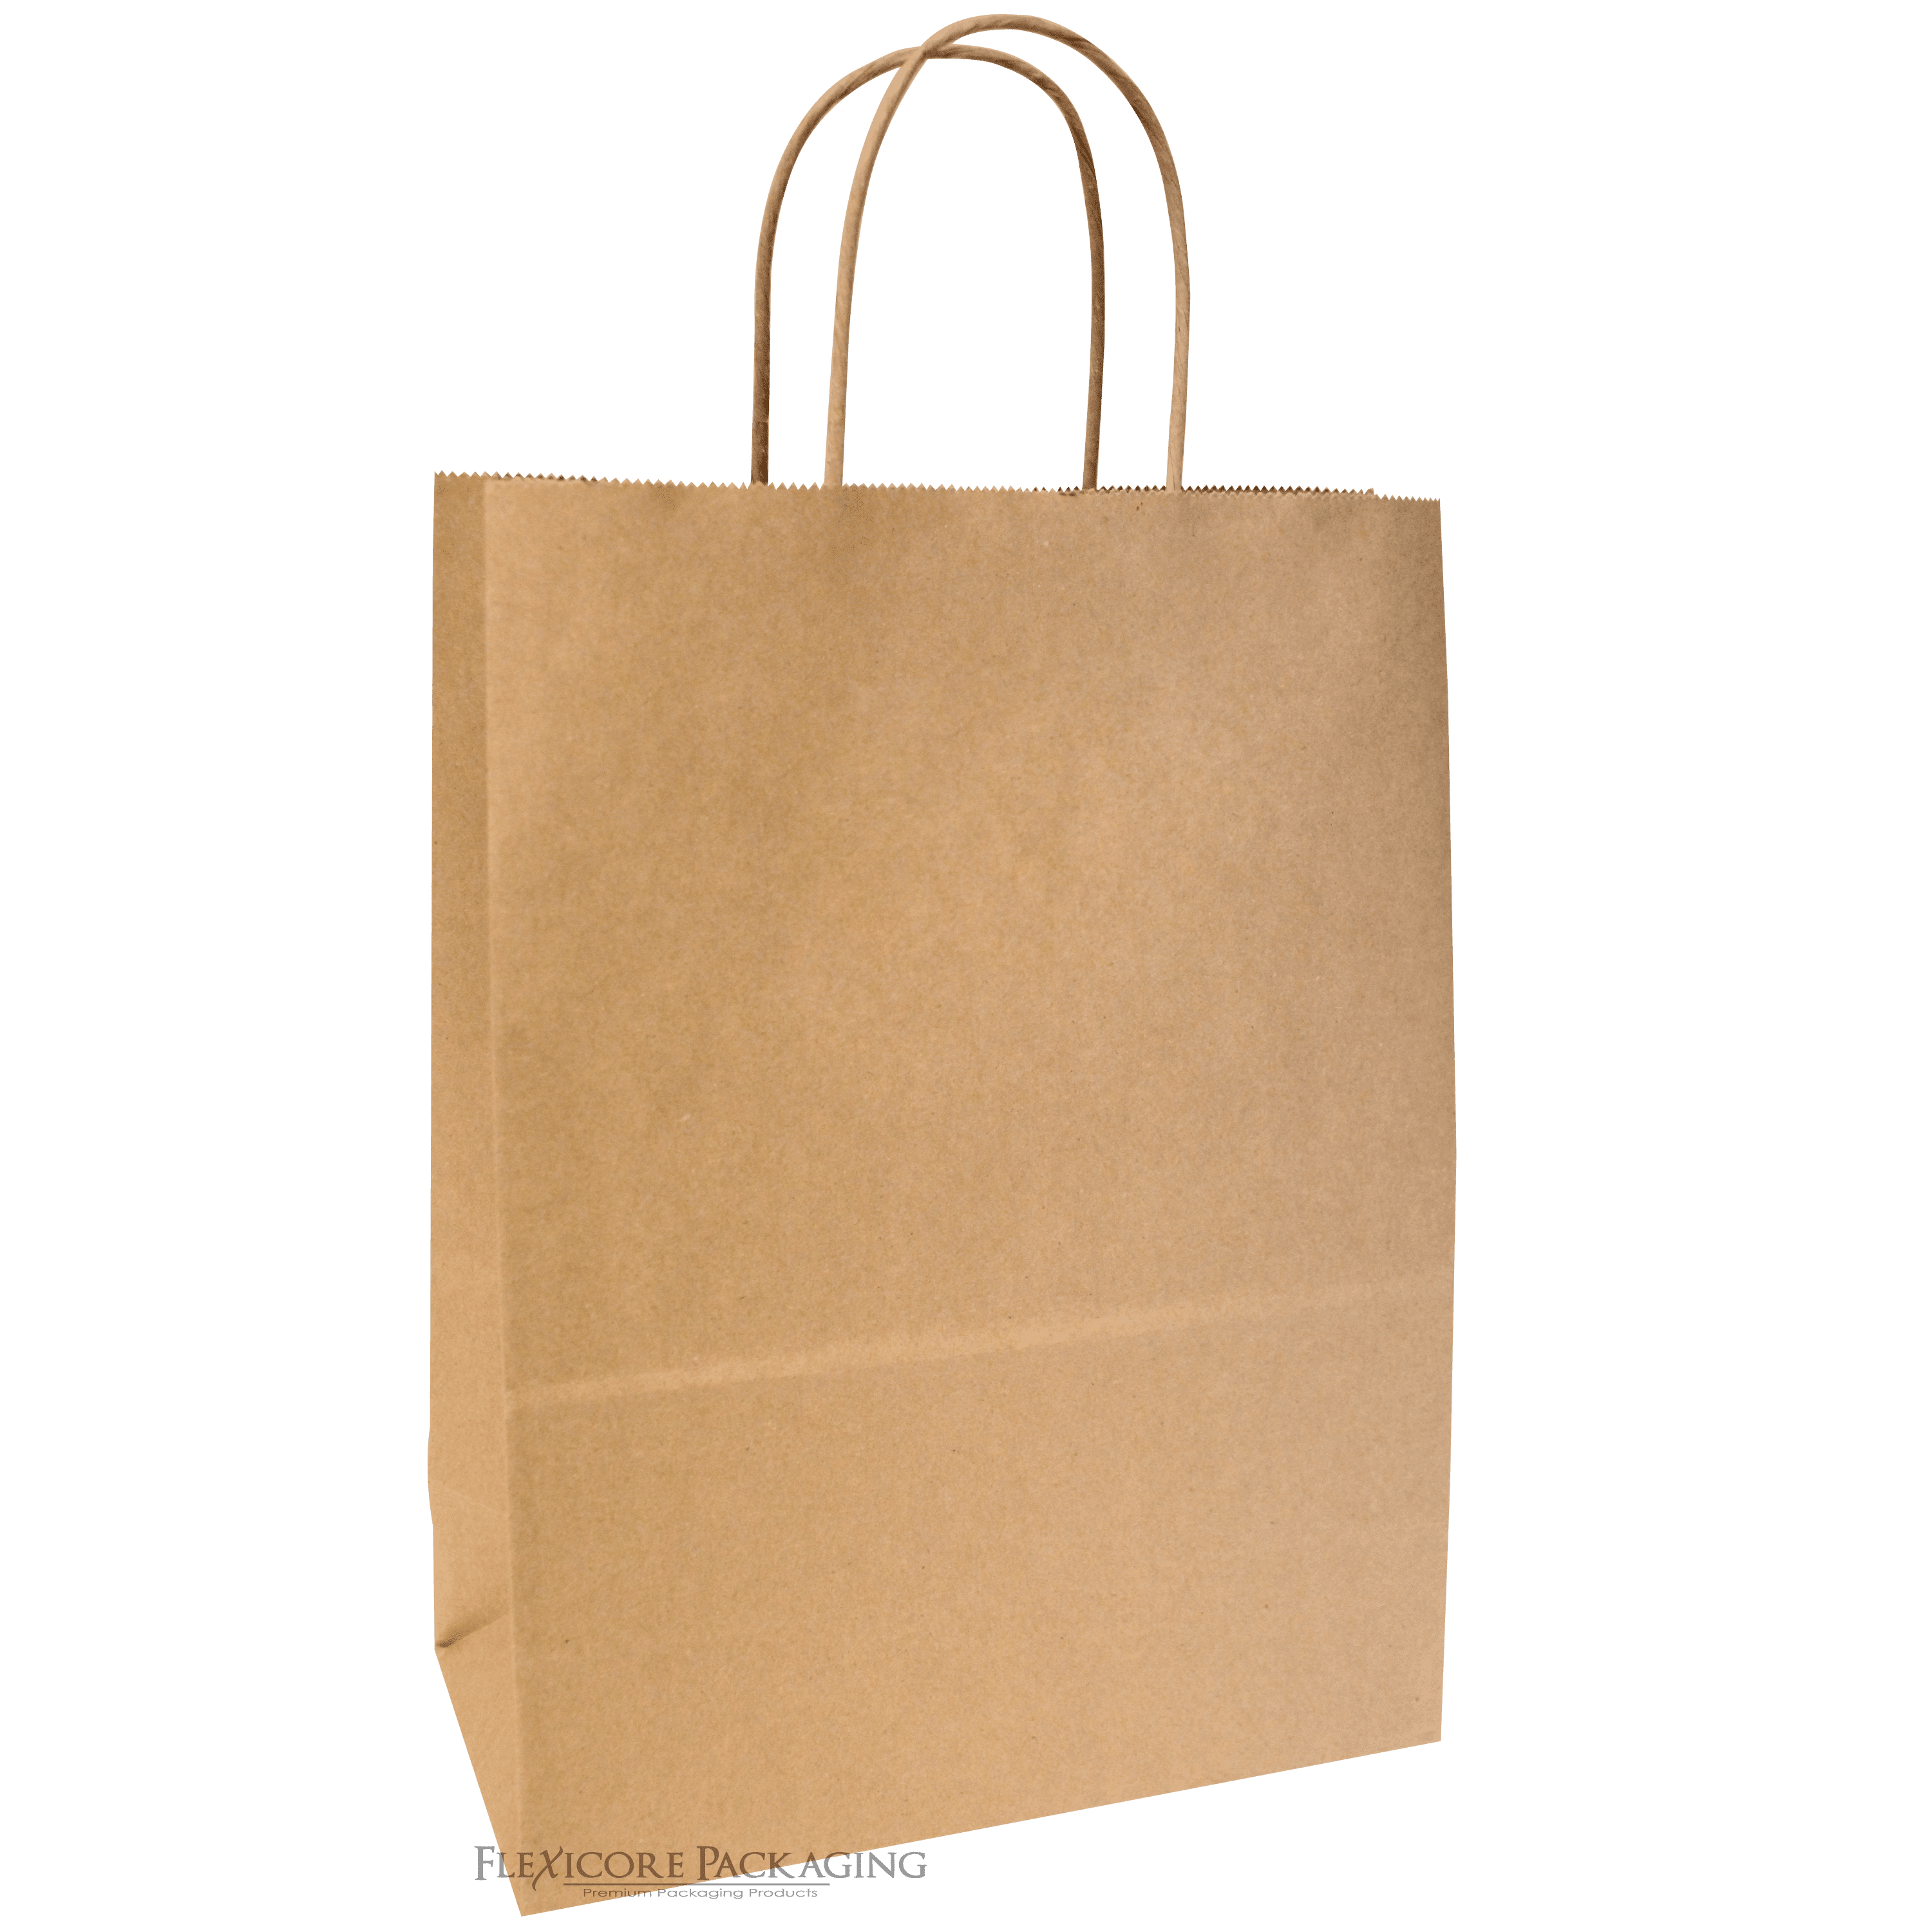 Paper Bags Bulk Containers Various Sizes CROSS Ground Floor Bags Carrier Bags Brown